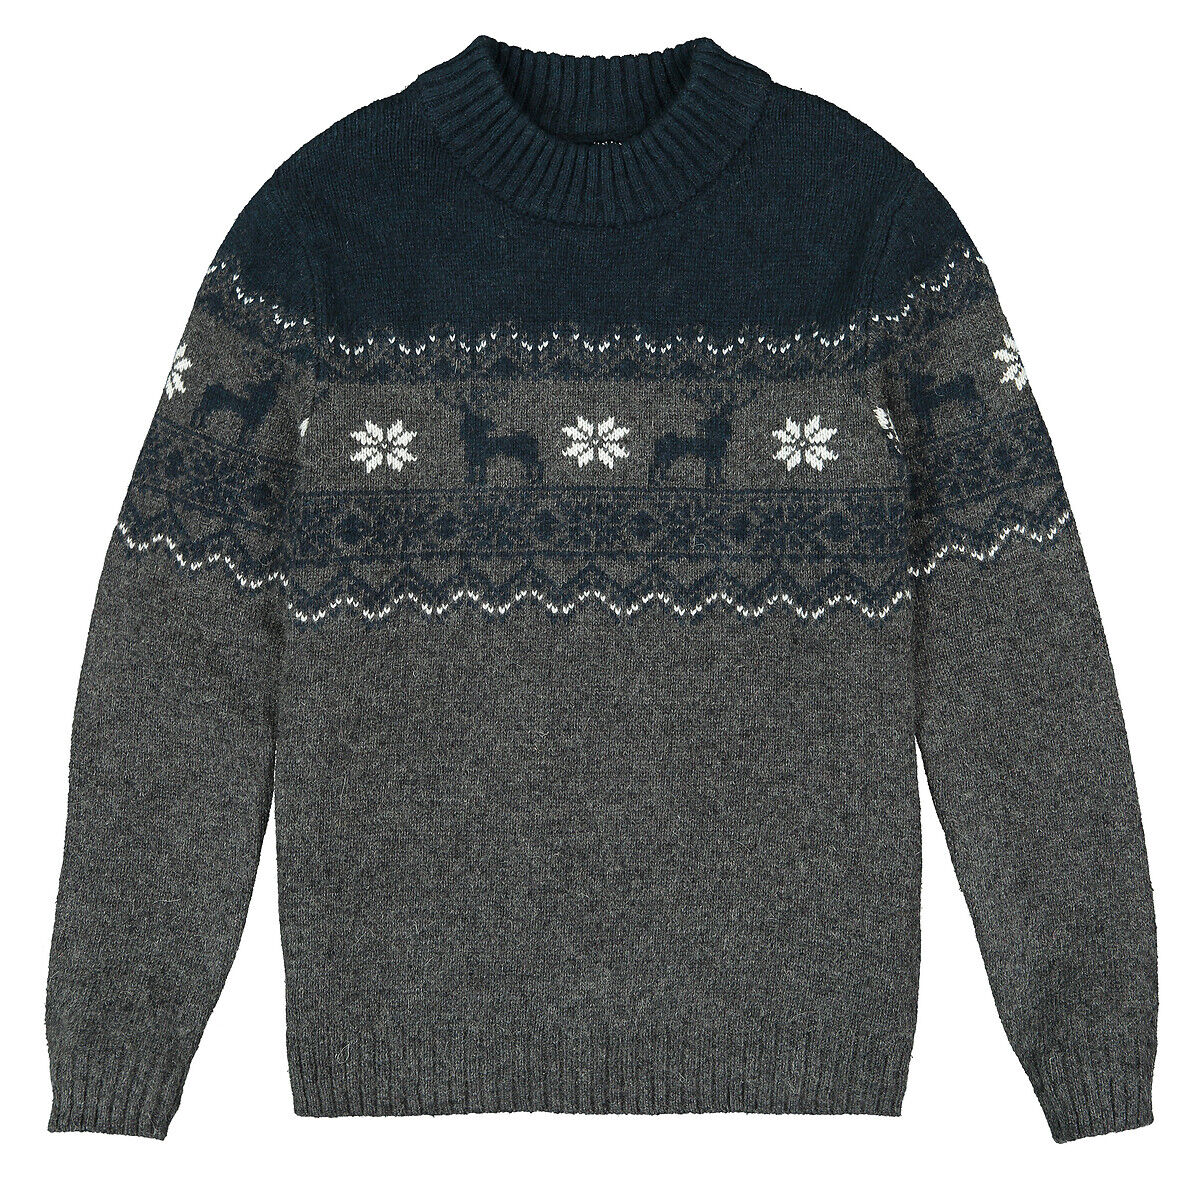 LA REDOUTE COLLECTIONS Weihnachtspullover mit Jacquard-Muster, 3-12 Jahre GRAU